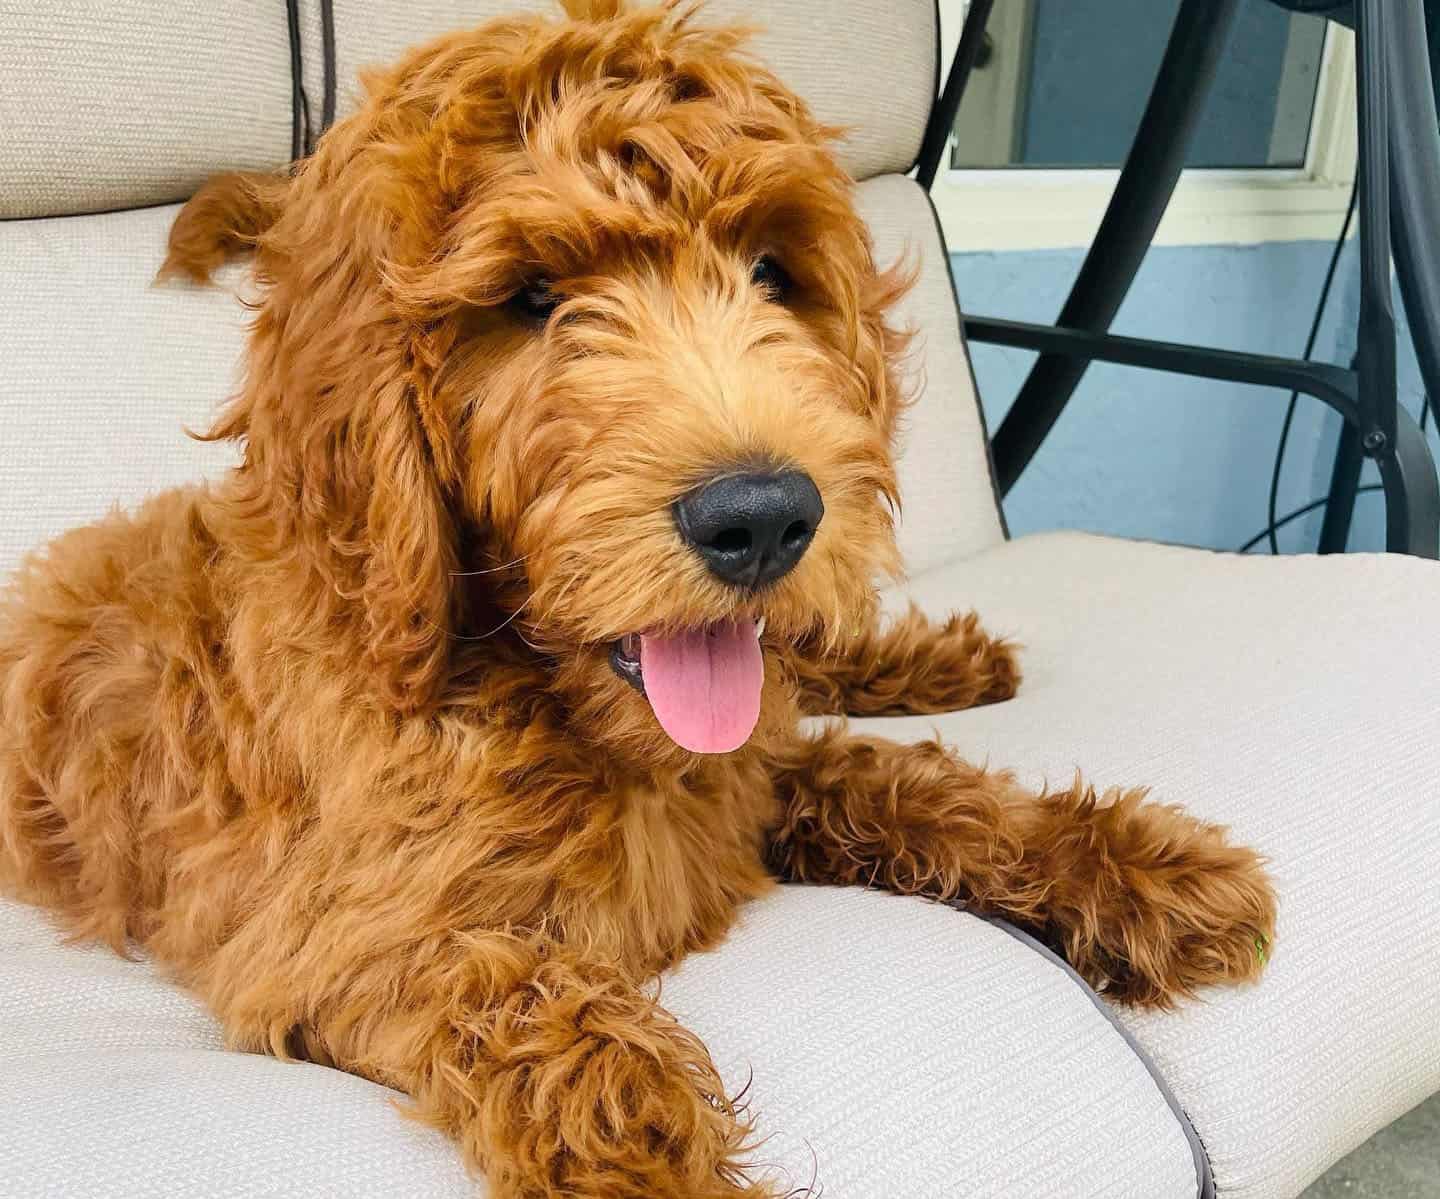 A Red Goldendoodle just chilling on the couch